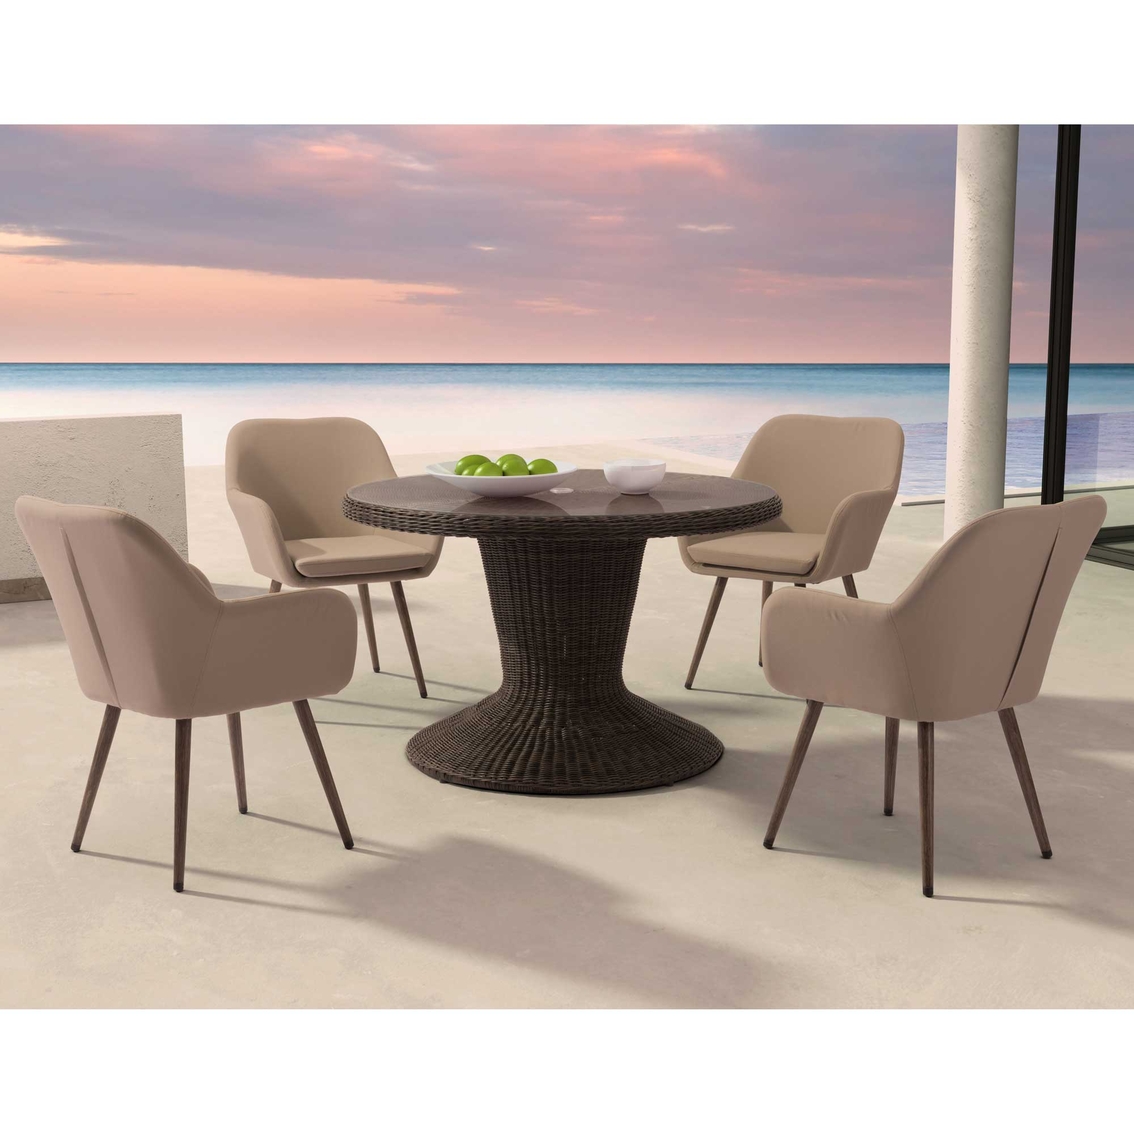 Zuo Modern Pismo Dining Chair - Image 5 of 7